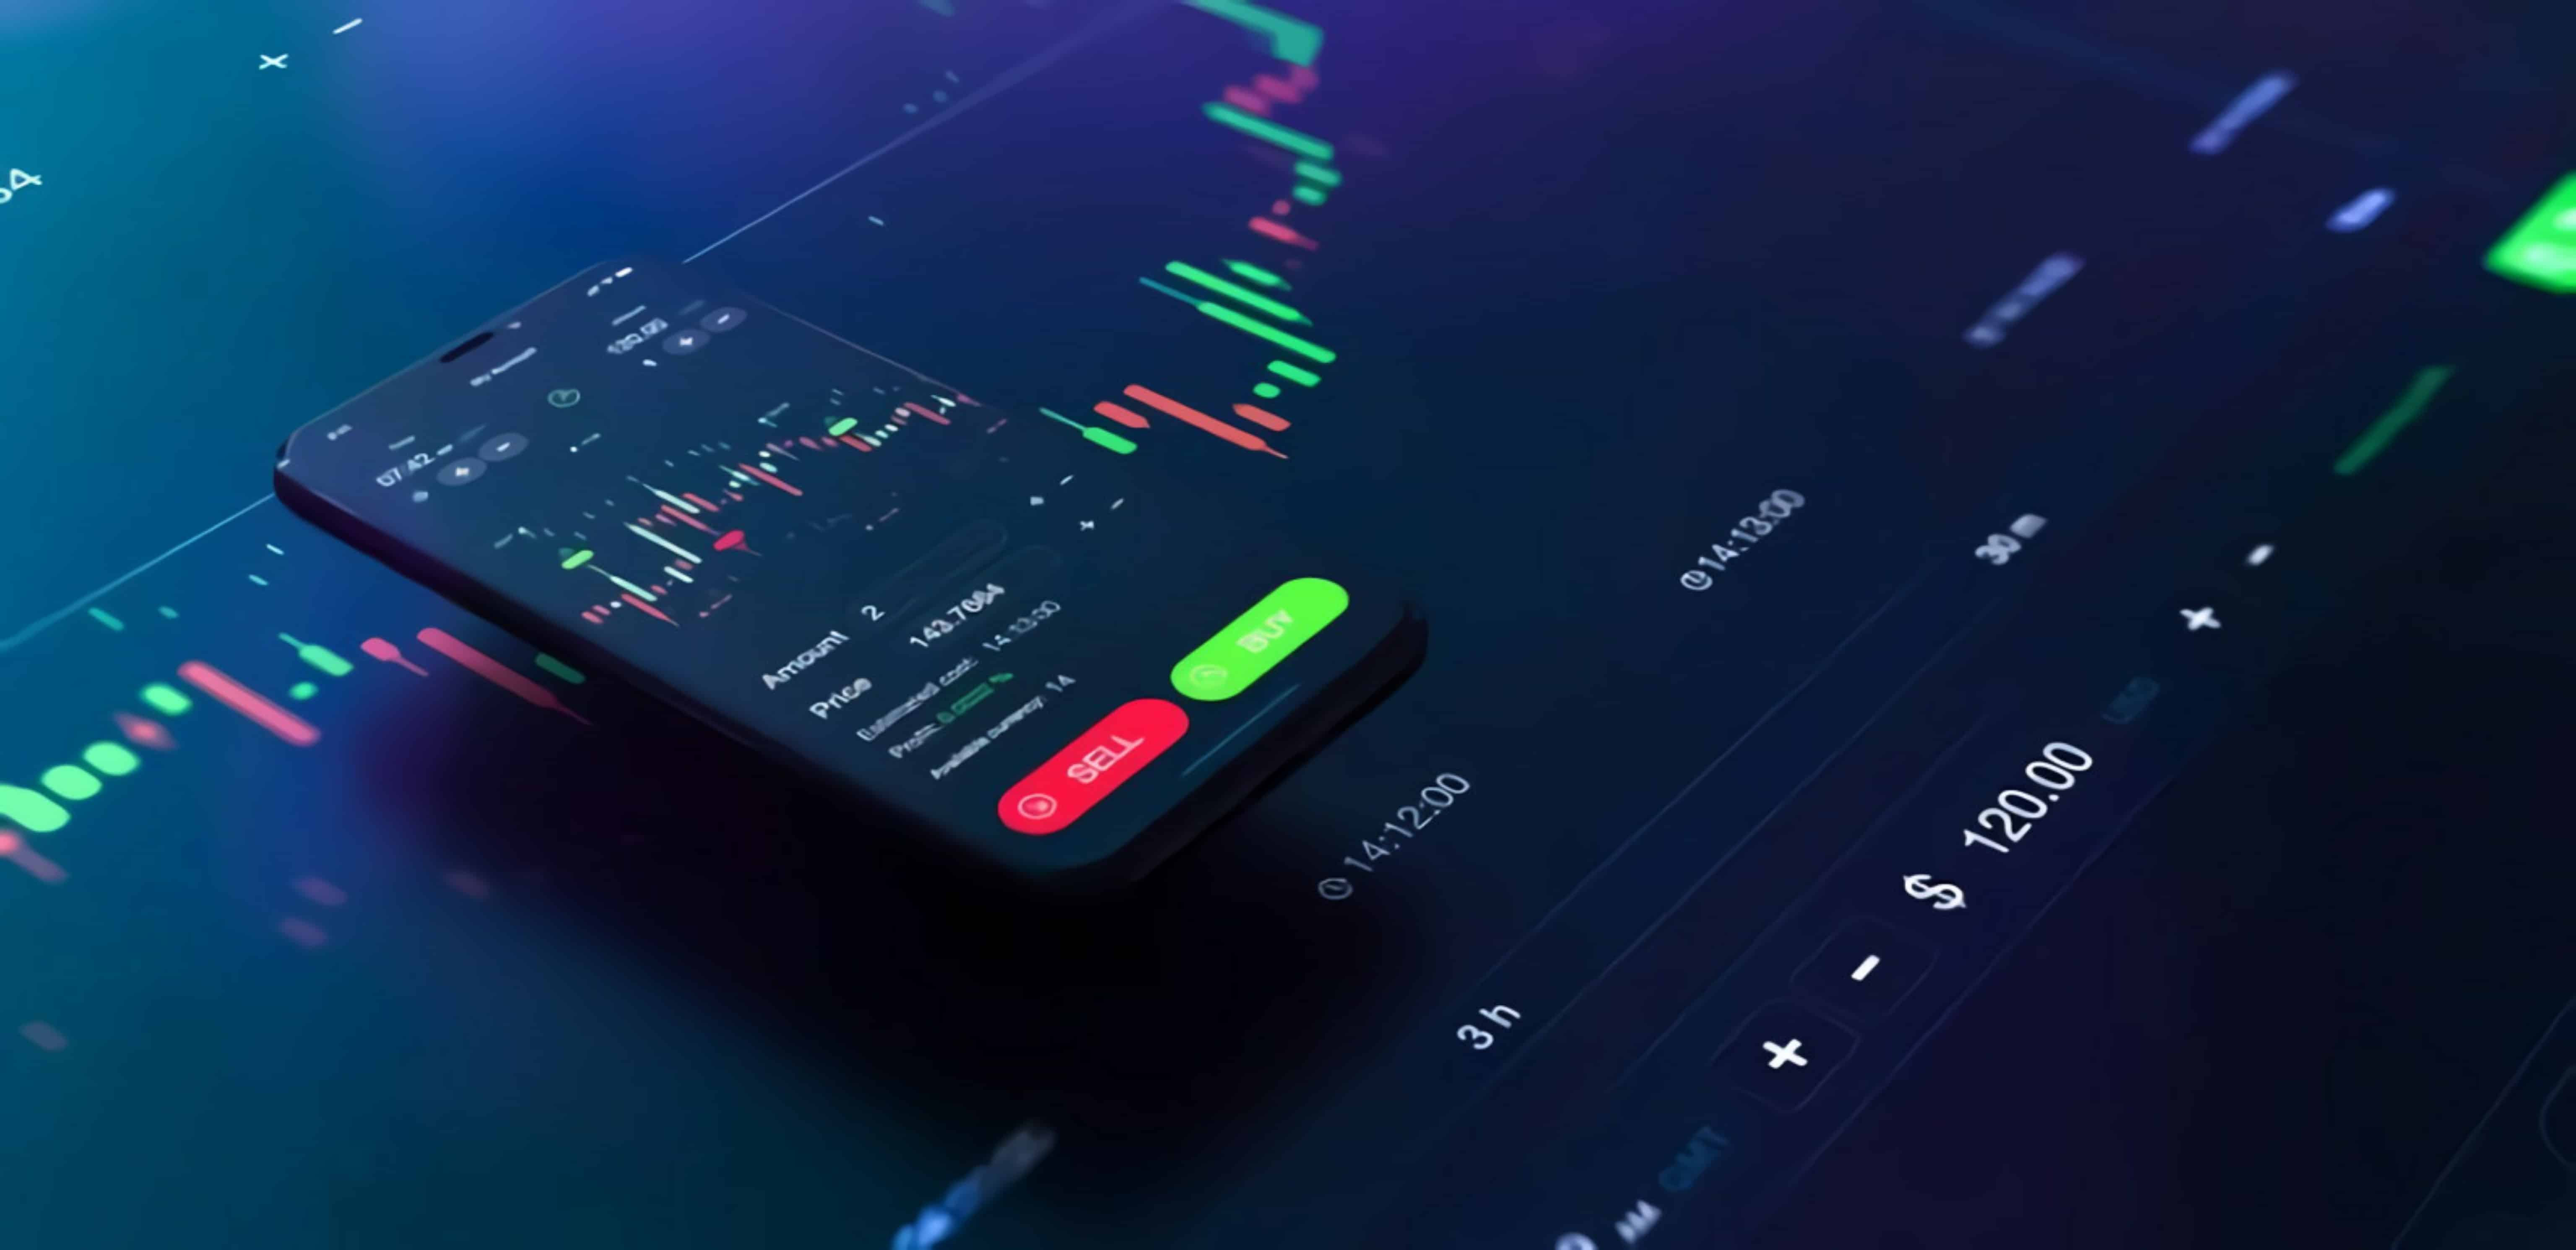 Gt-Trader Review: The Convenience Of Mobile Trading